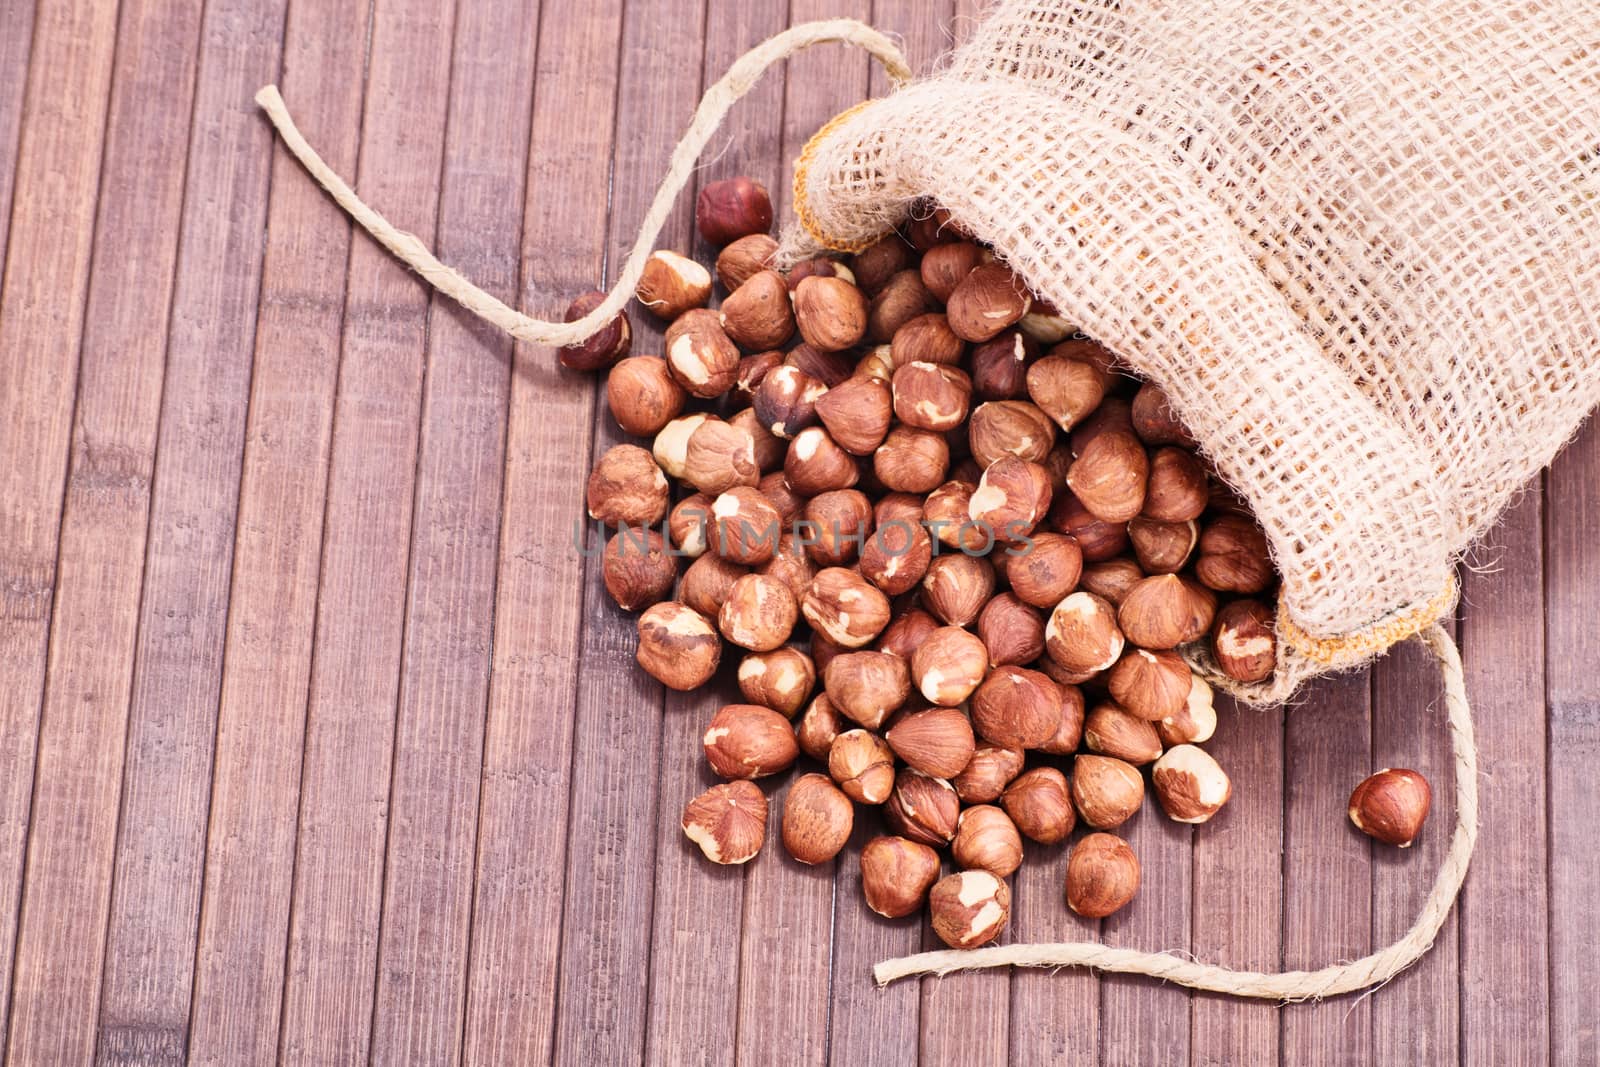 Close up shot of hazelnuts in a burlap sack spilled on wooden background.